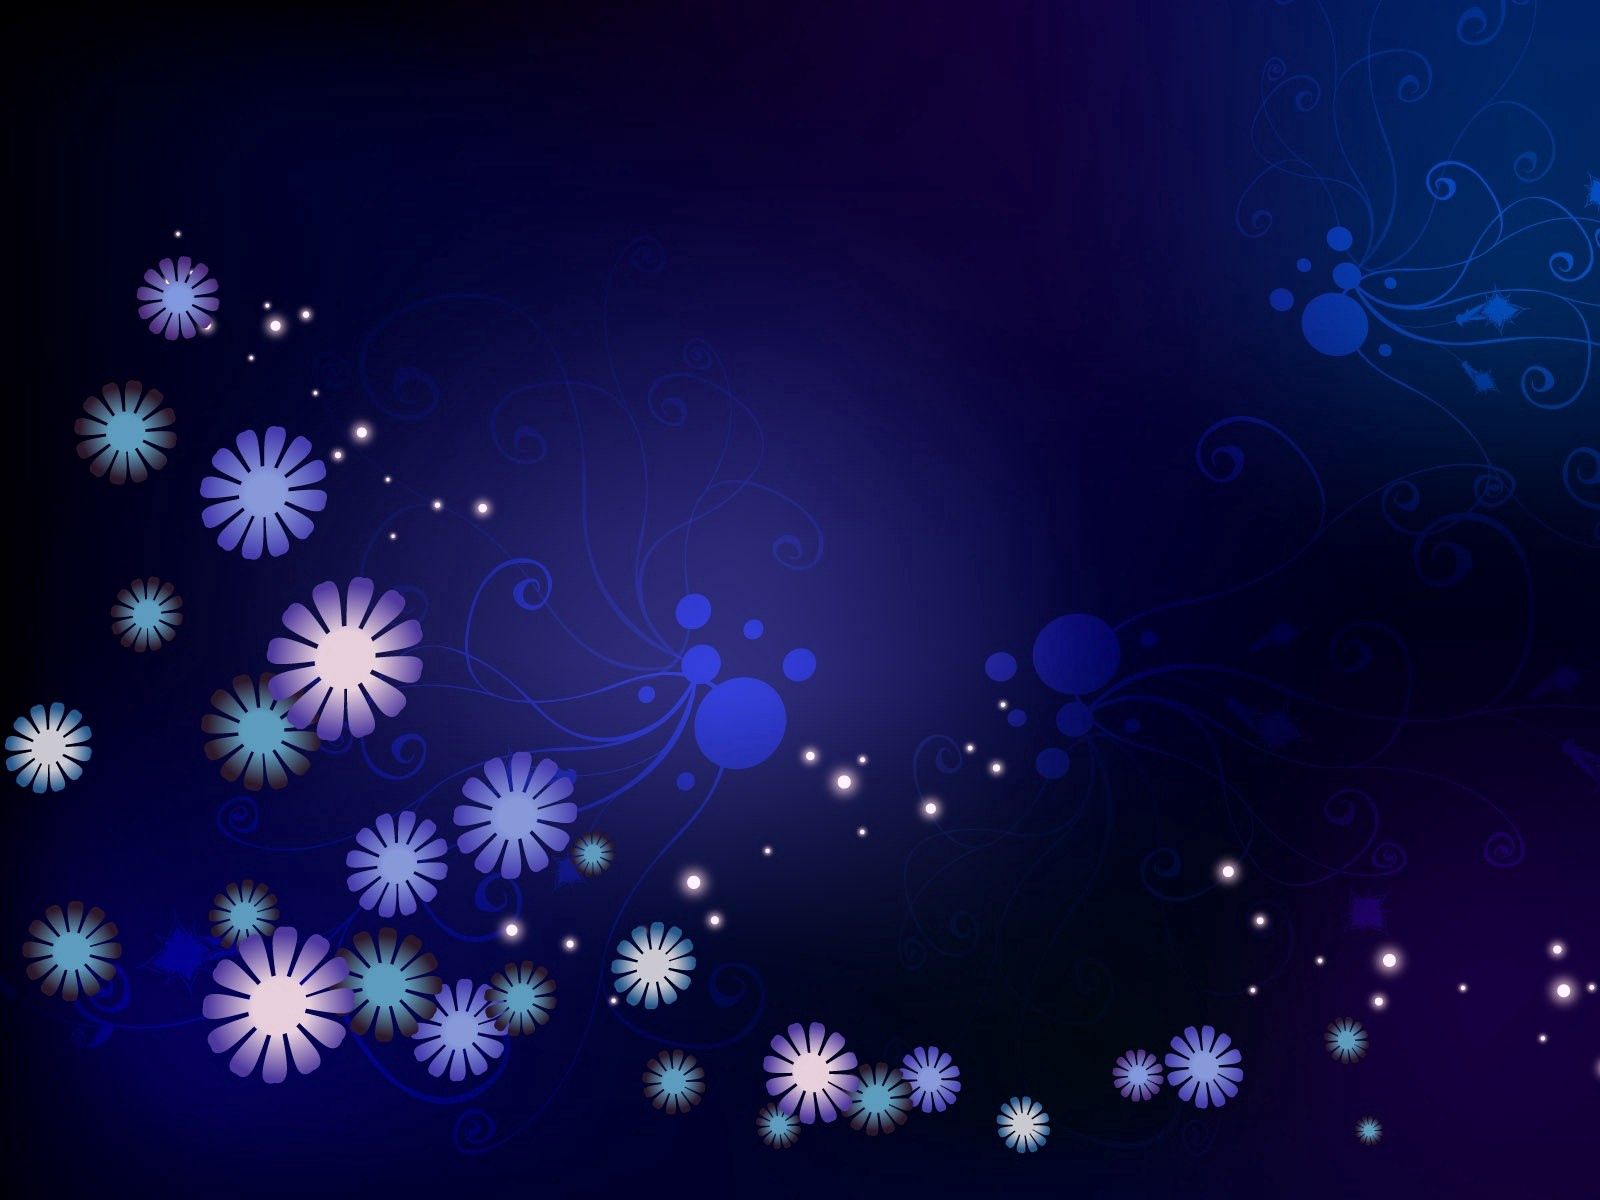 light color wallpapers flowers